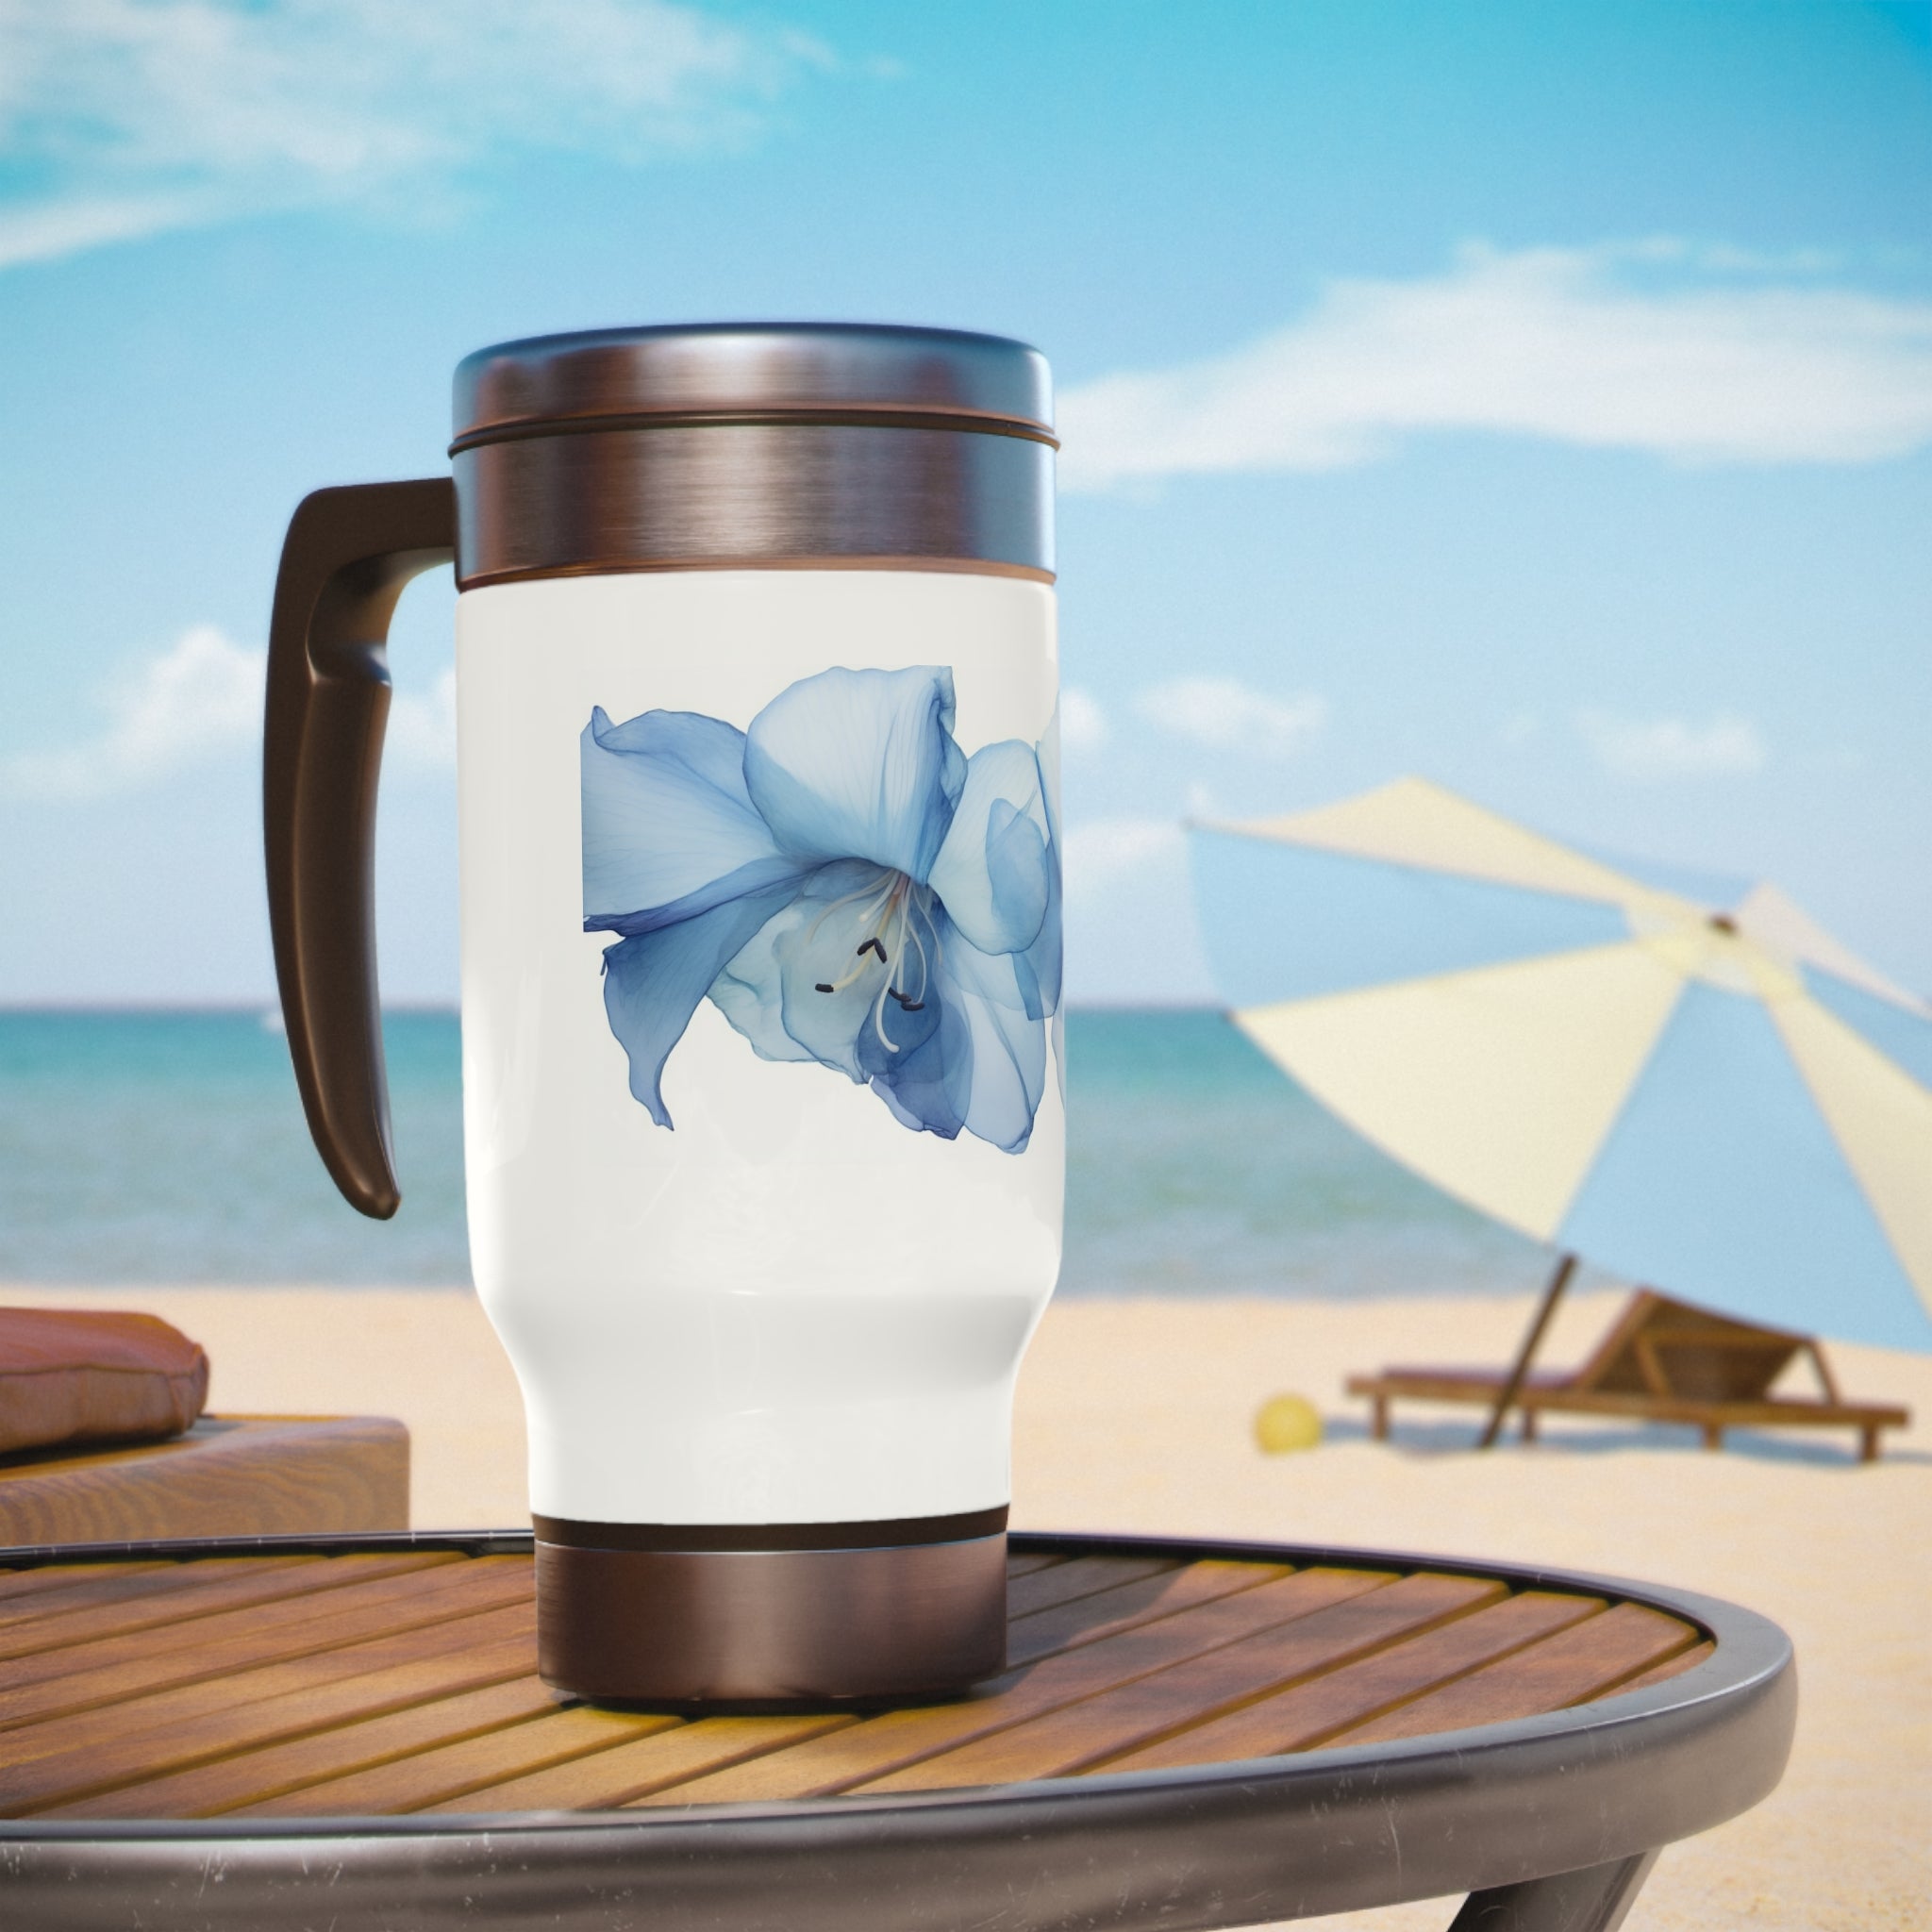 Stainless Steel Travel Mug with Handle, 14oz - Blue Calle Lily, Watercolor